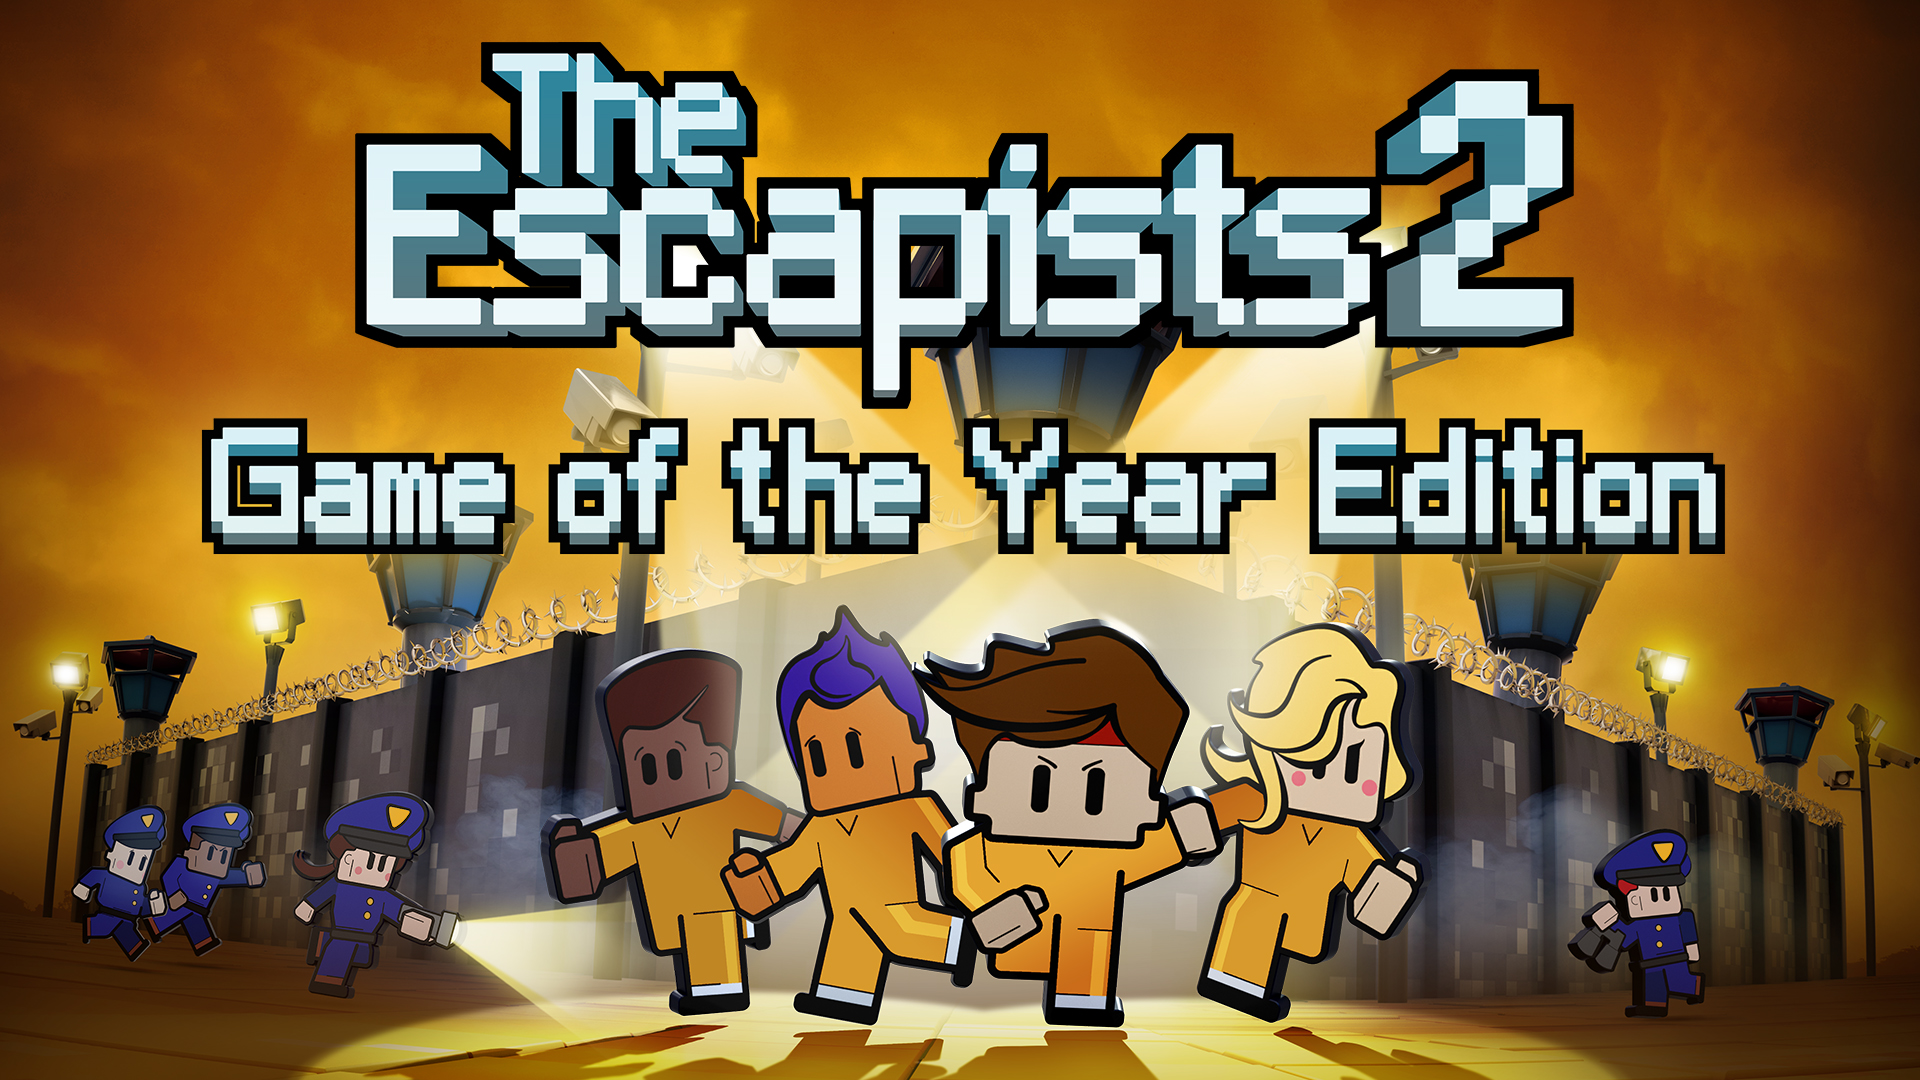 the escapists 2 ps4 download